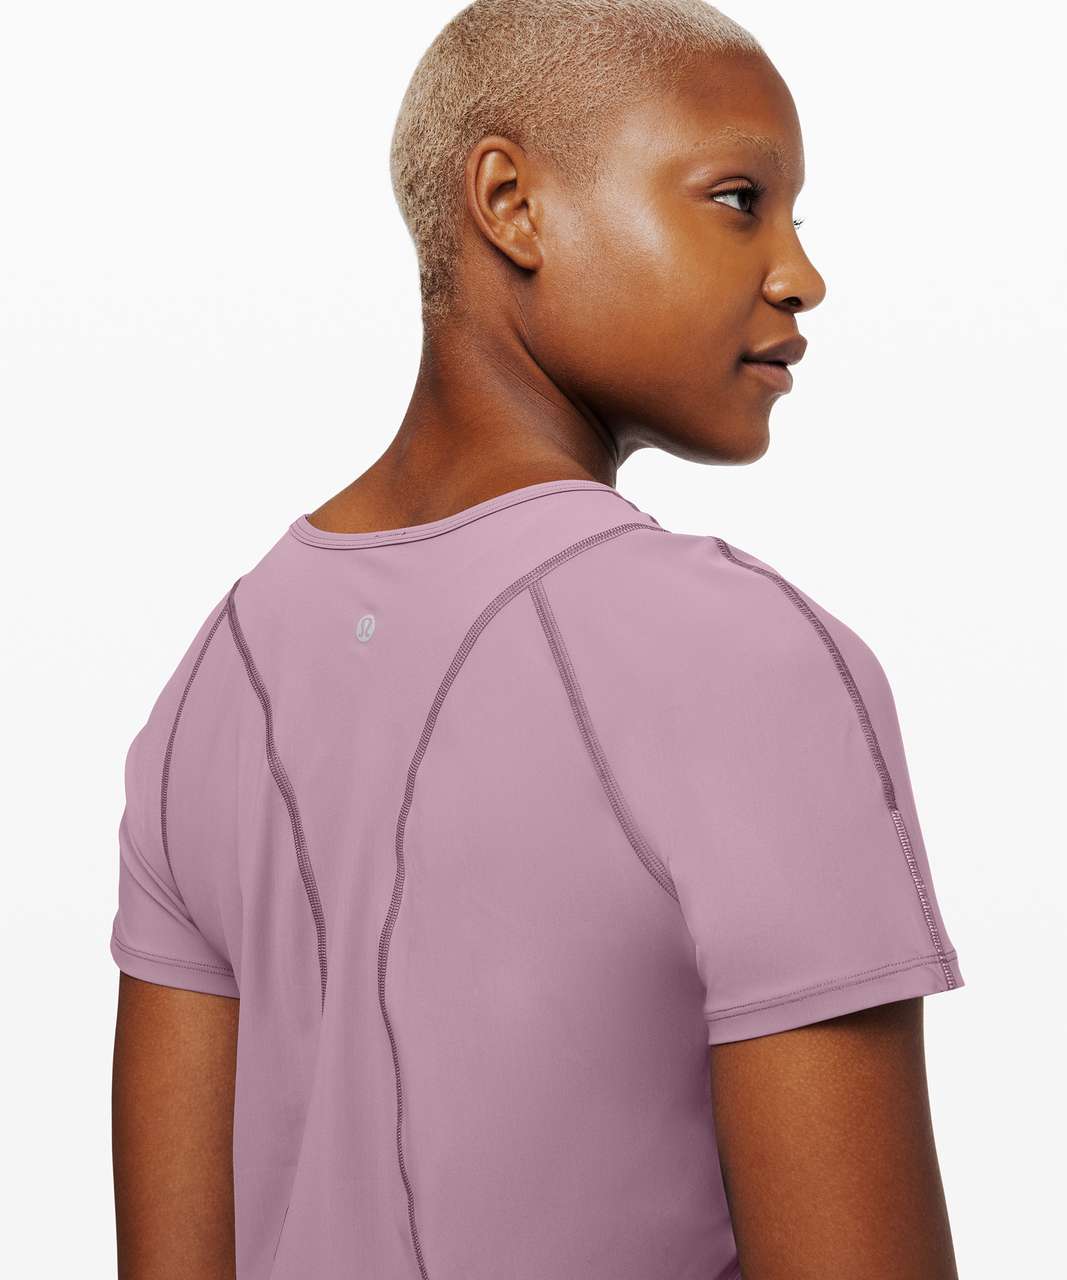 Lululemon Outrun the Heat Short Sleeve - Frosted Mulberry